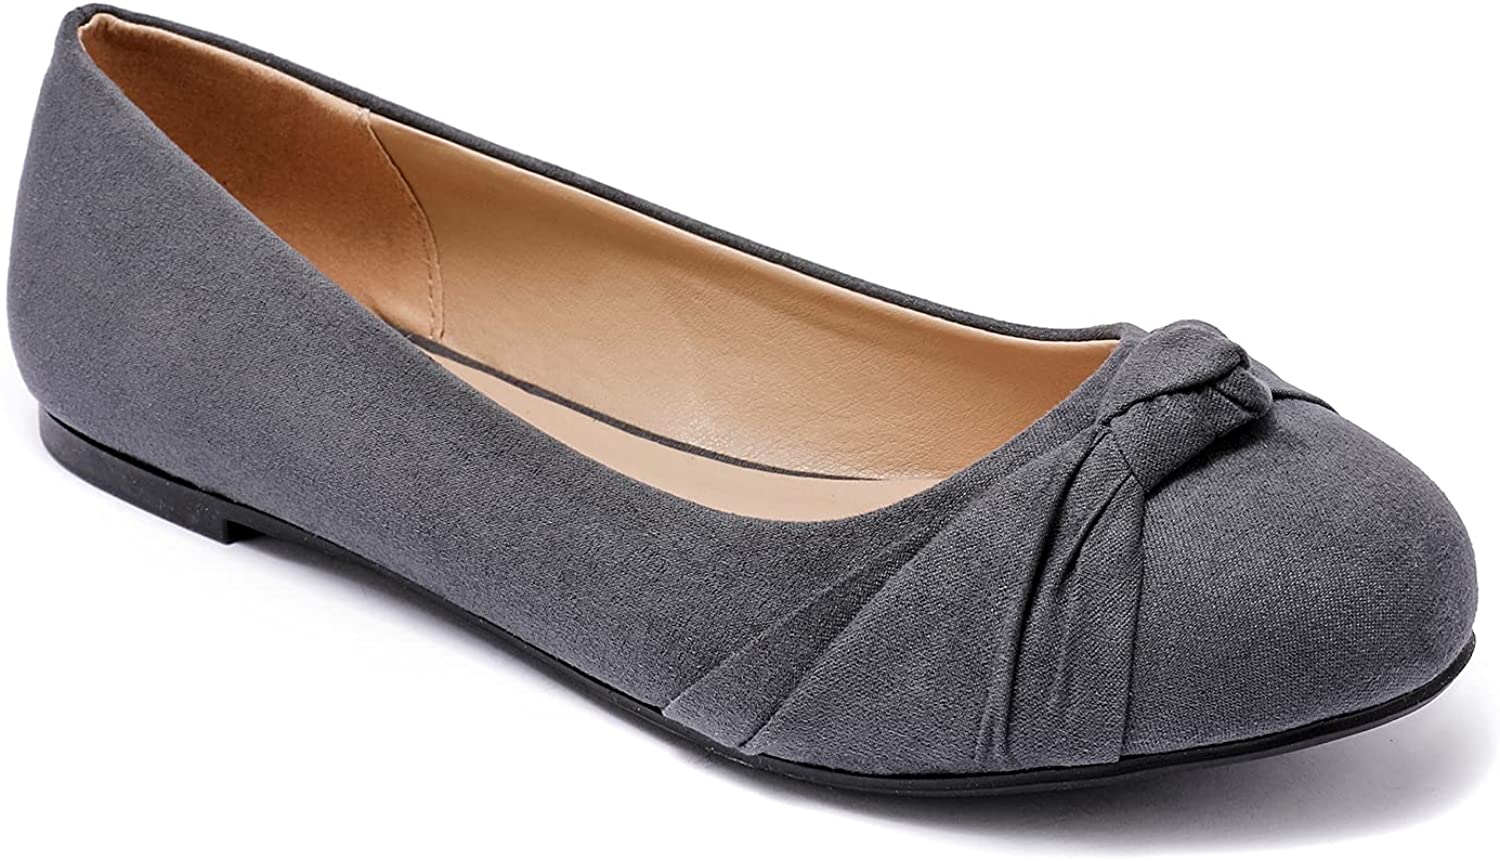 Luoika Womens Wide Width Flat Shoes Casual Comfort Slip On Ballet Flats.